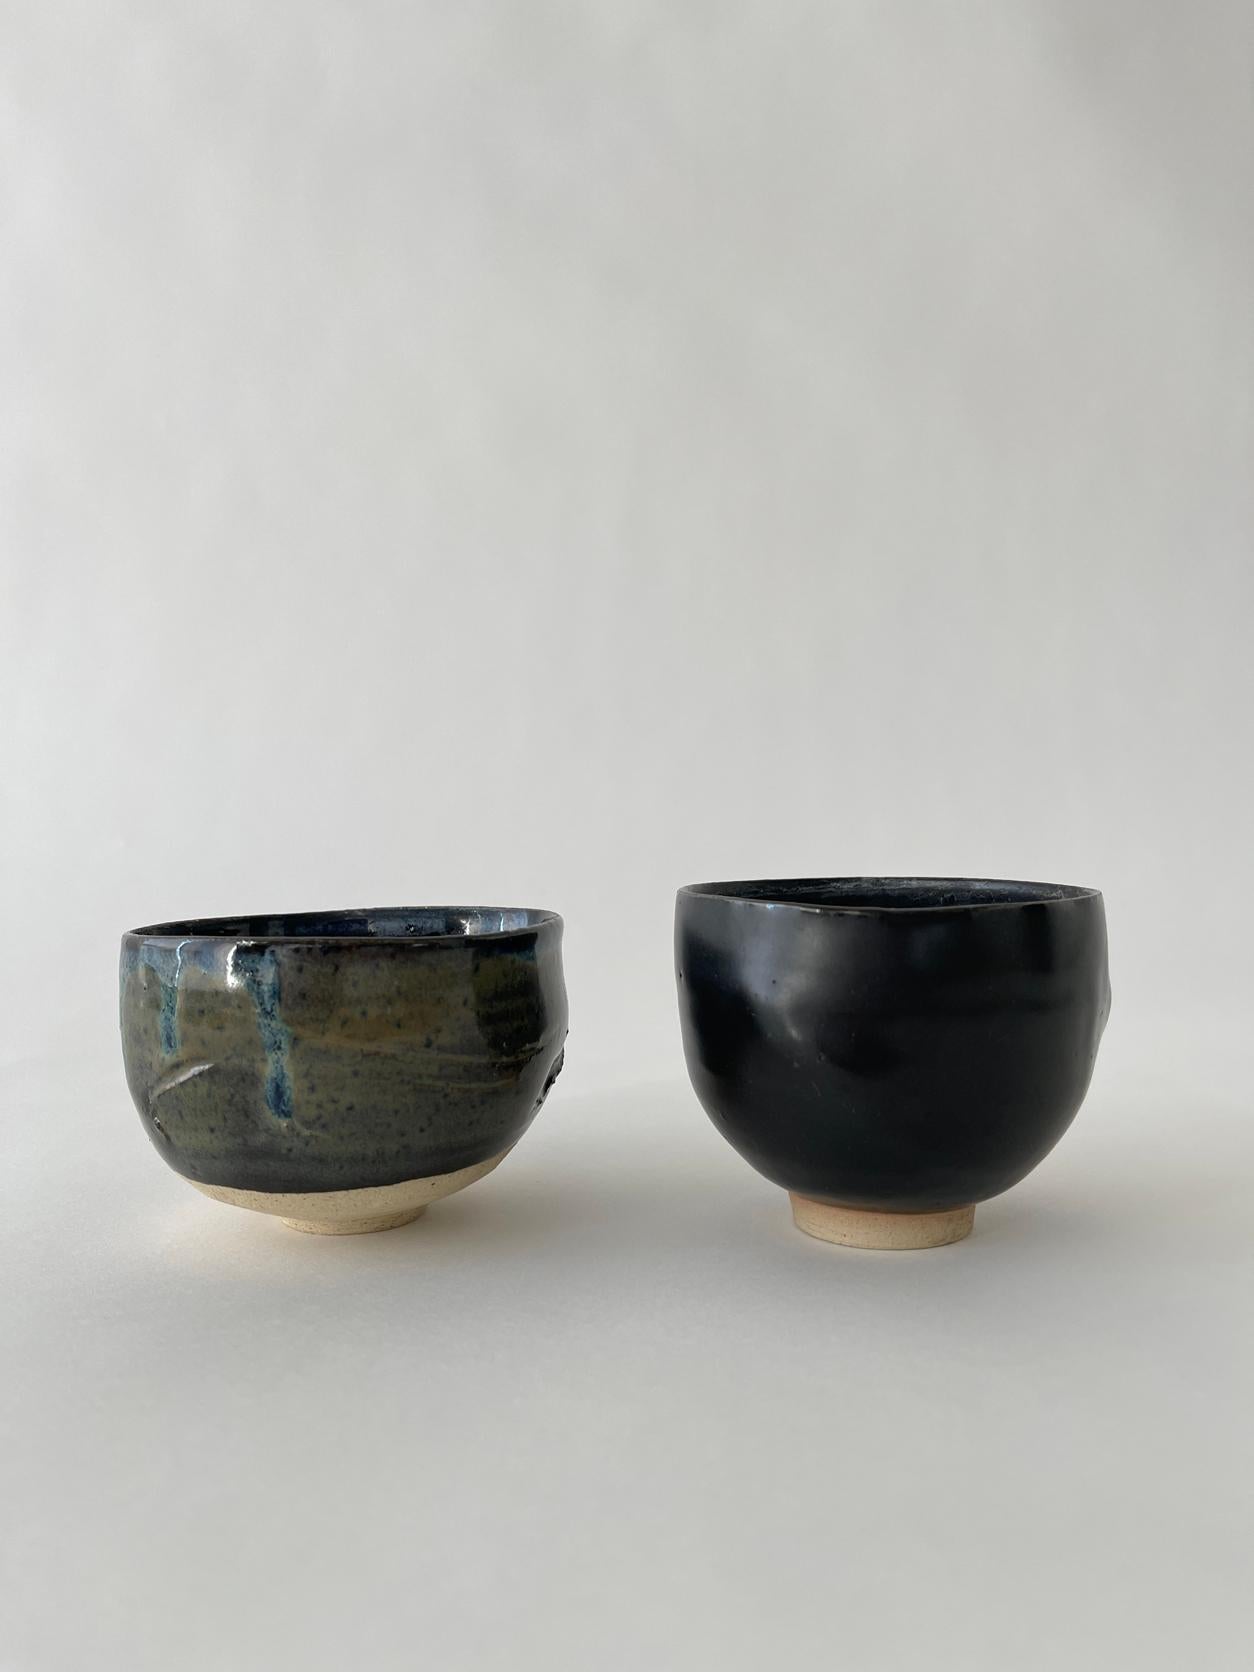 20th century Japanese Ceramic tea cup set with an abstract form and dark colored semi glazed body with textured off white bottoms. 

Set of 2
Measures: Cup 1: 4